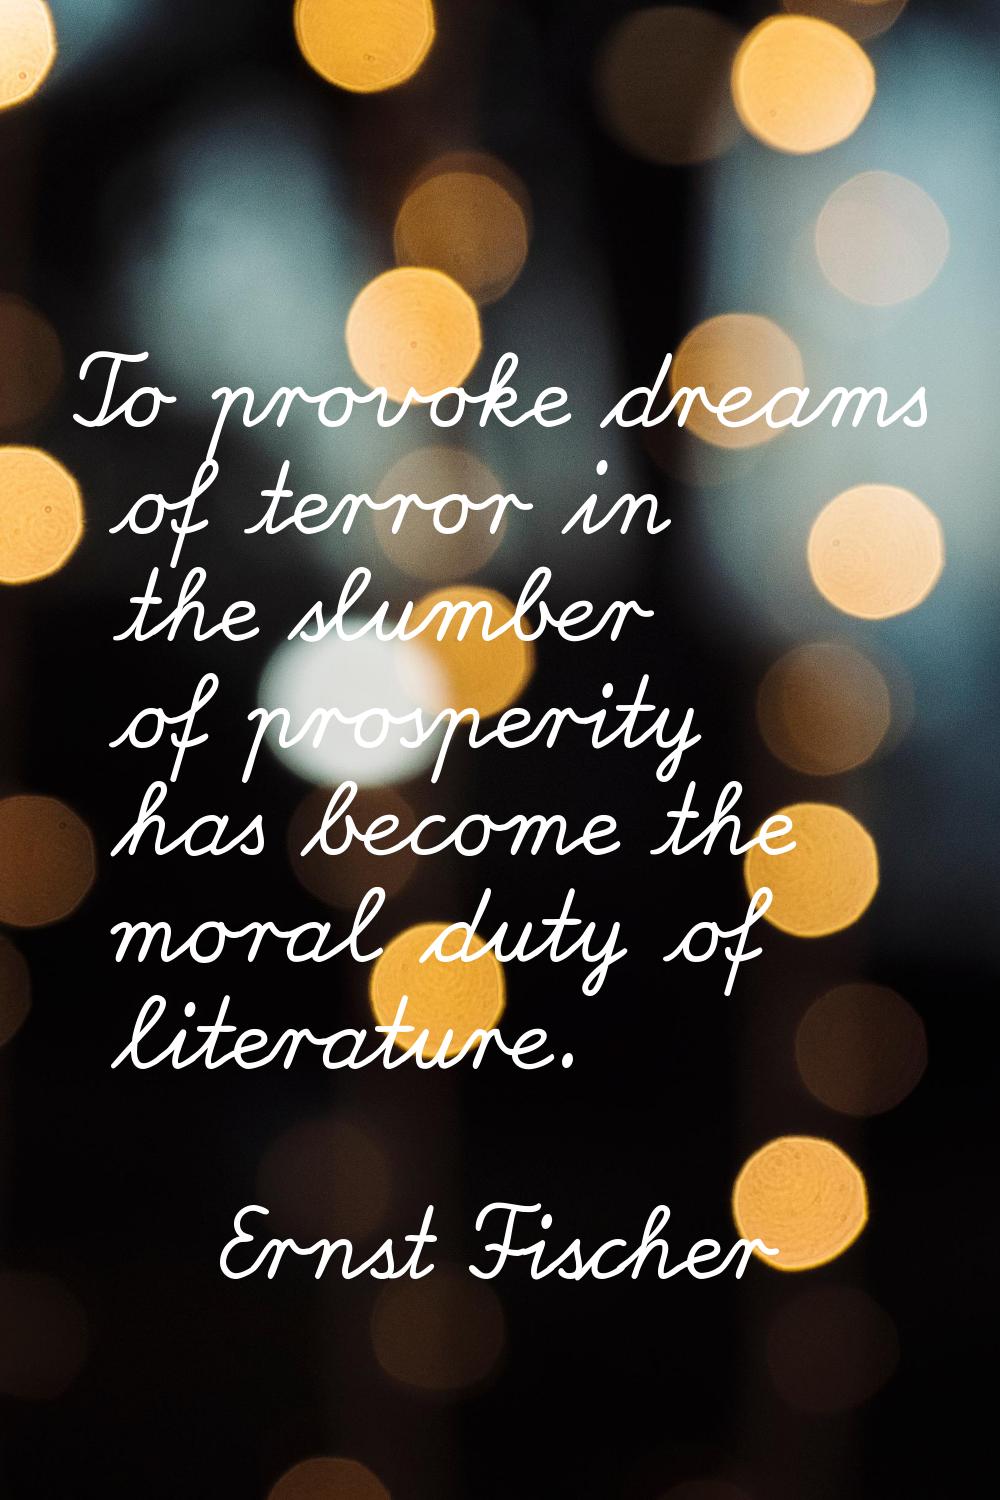 To provoke dreams of terror in the slumber of prosperity has become the moral duty of literature.